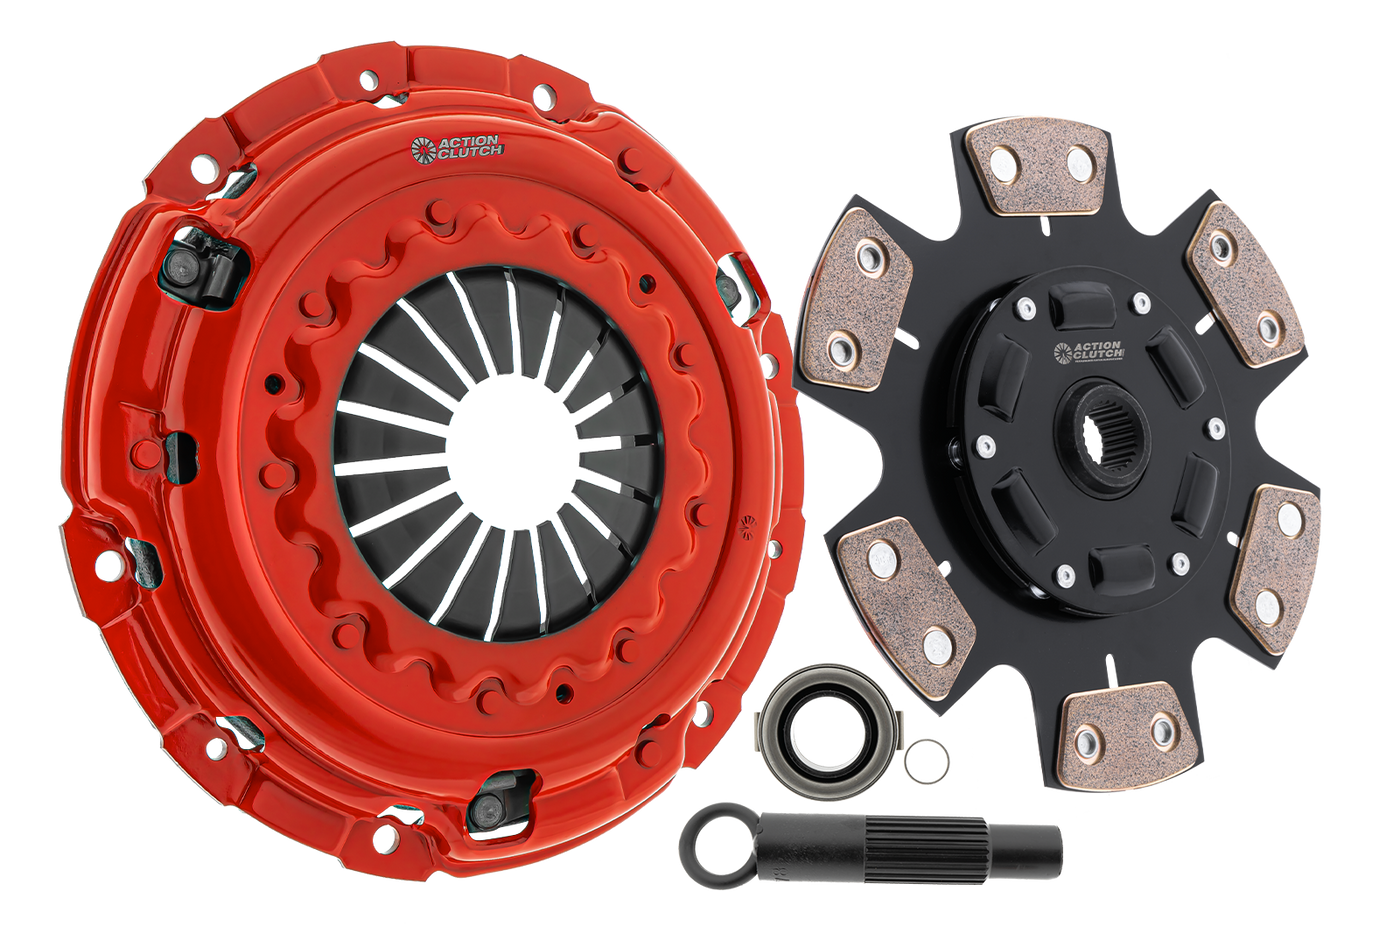 Stage 3 Clutch Kit (1MS) for Nissan 350Z 2007-2008 3.5L (VQ35HR) Without Heavy Duty Concentric Slave Cylinder